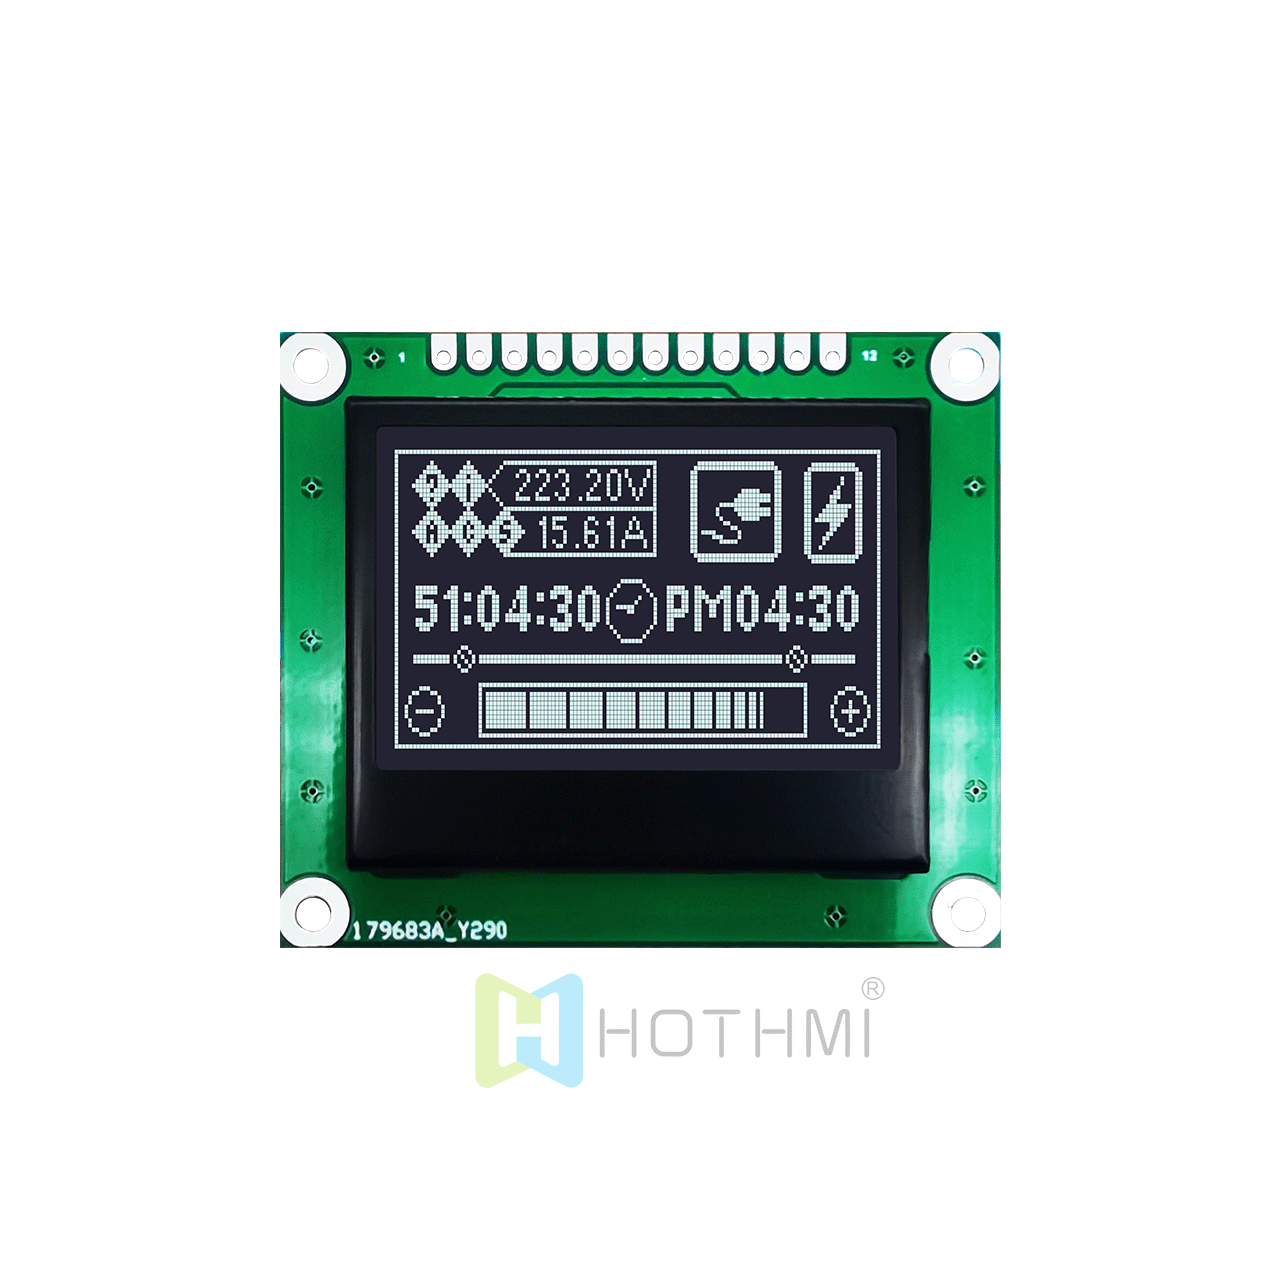 1.7" 128 x 64 Graphic LCD | SPI Interface | 12864 Graphic Module Display | DFSTN Negative Display | Transflective Polarizer | White on Black